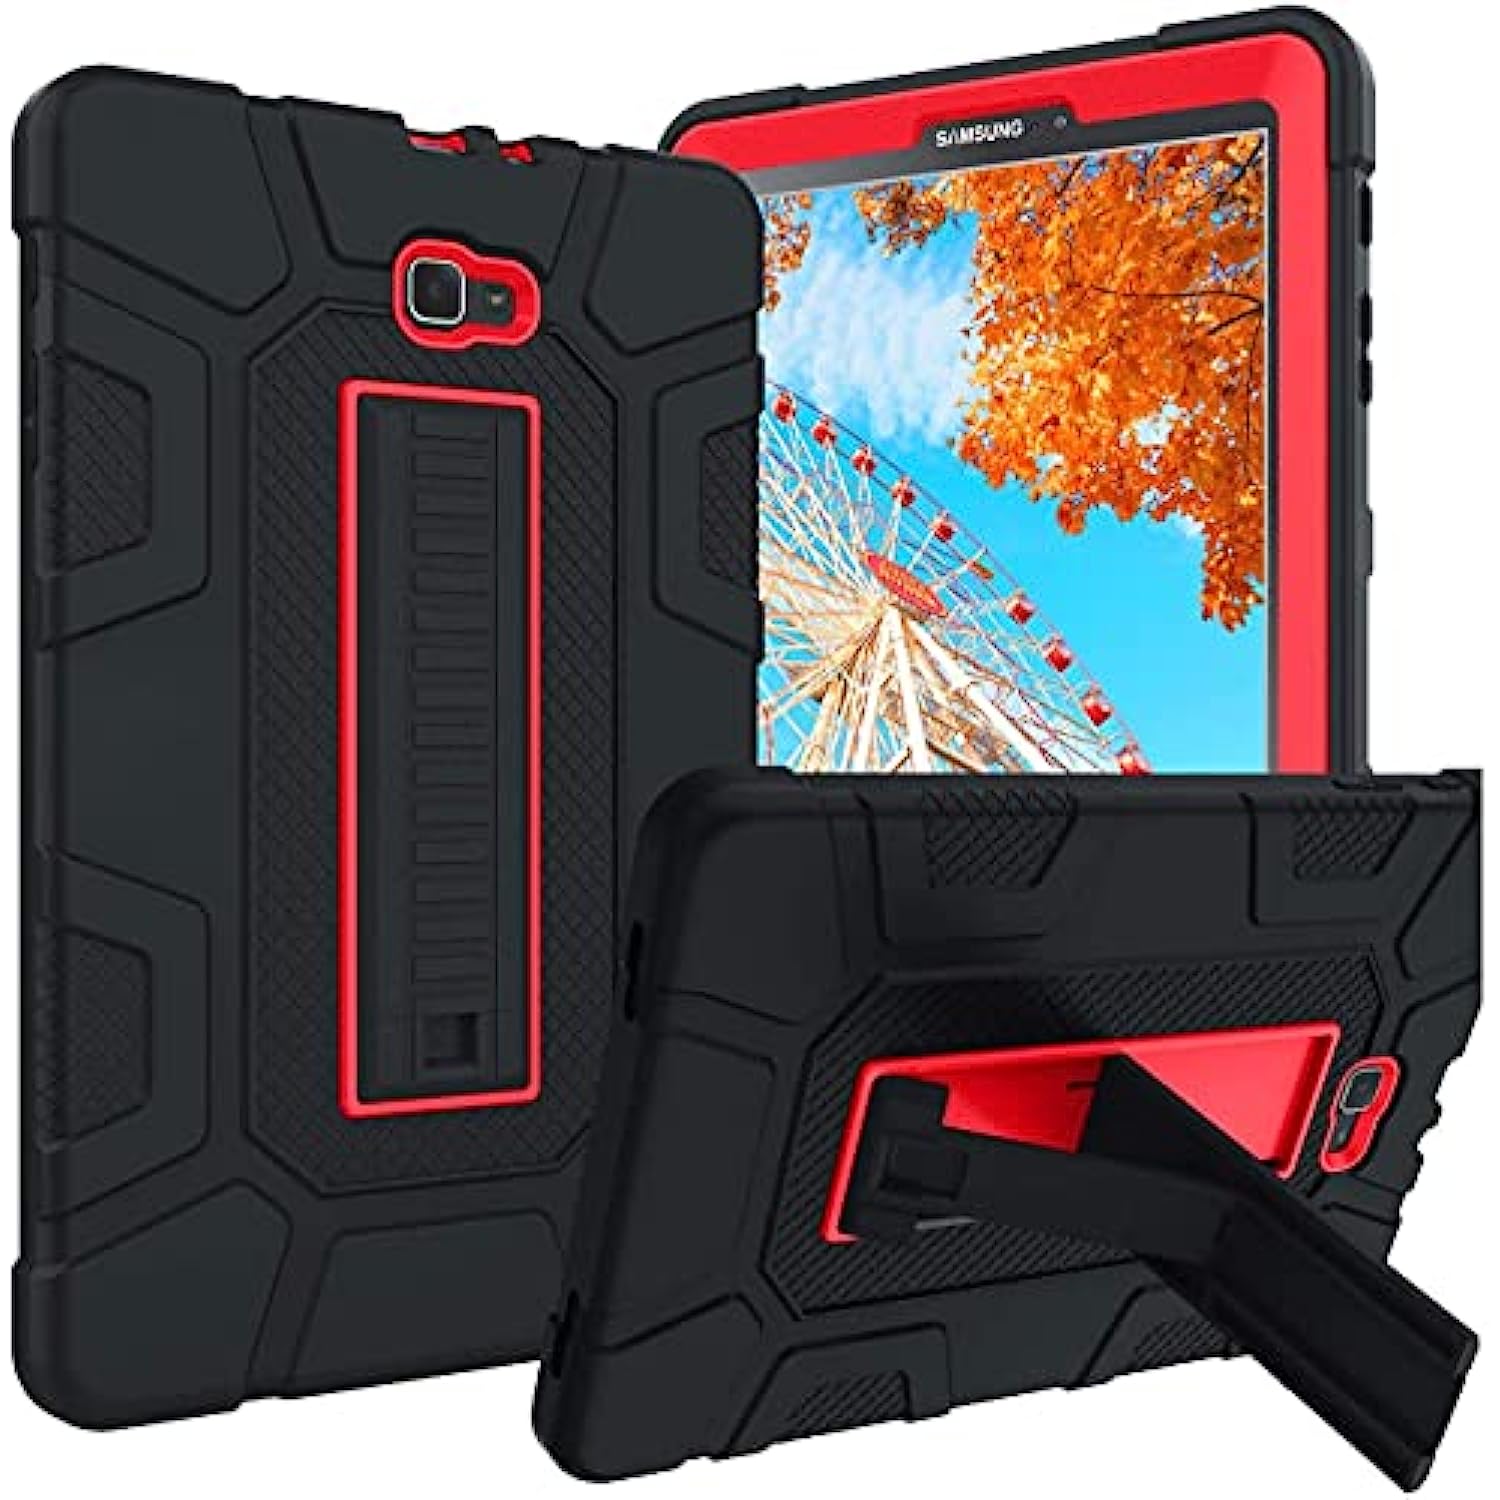 3 in 1 Heavy Duty Rugged Shockproof Protective Anti-Scratch Case Compatible with Samsung Galaxy Tab A 10.1 2016 Case SM-T580 T585 T587